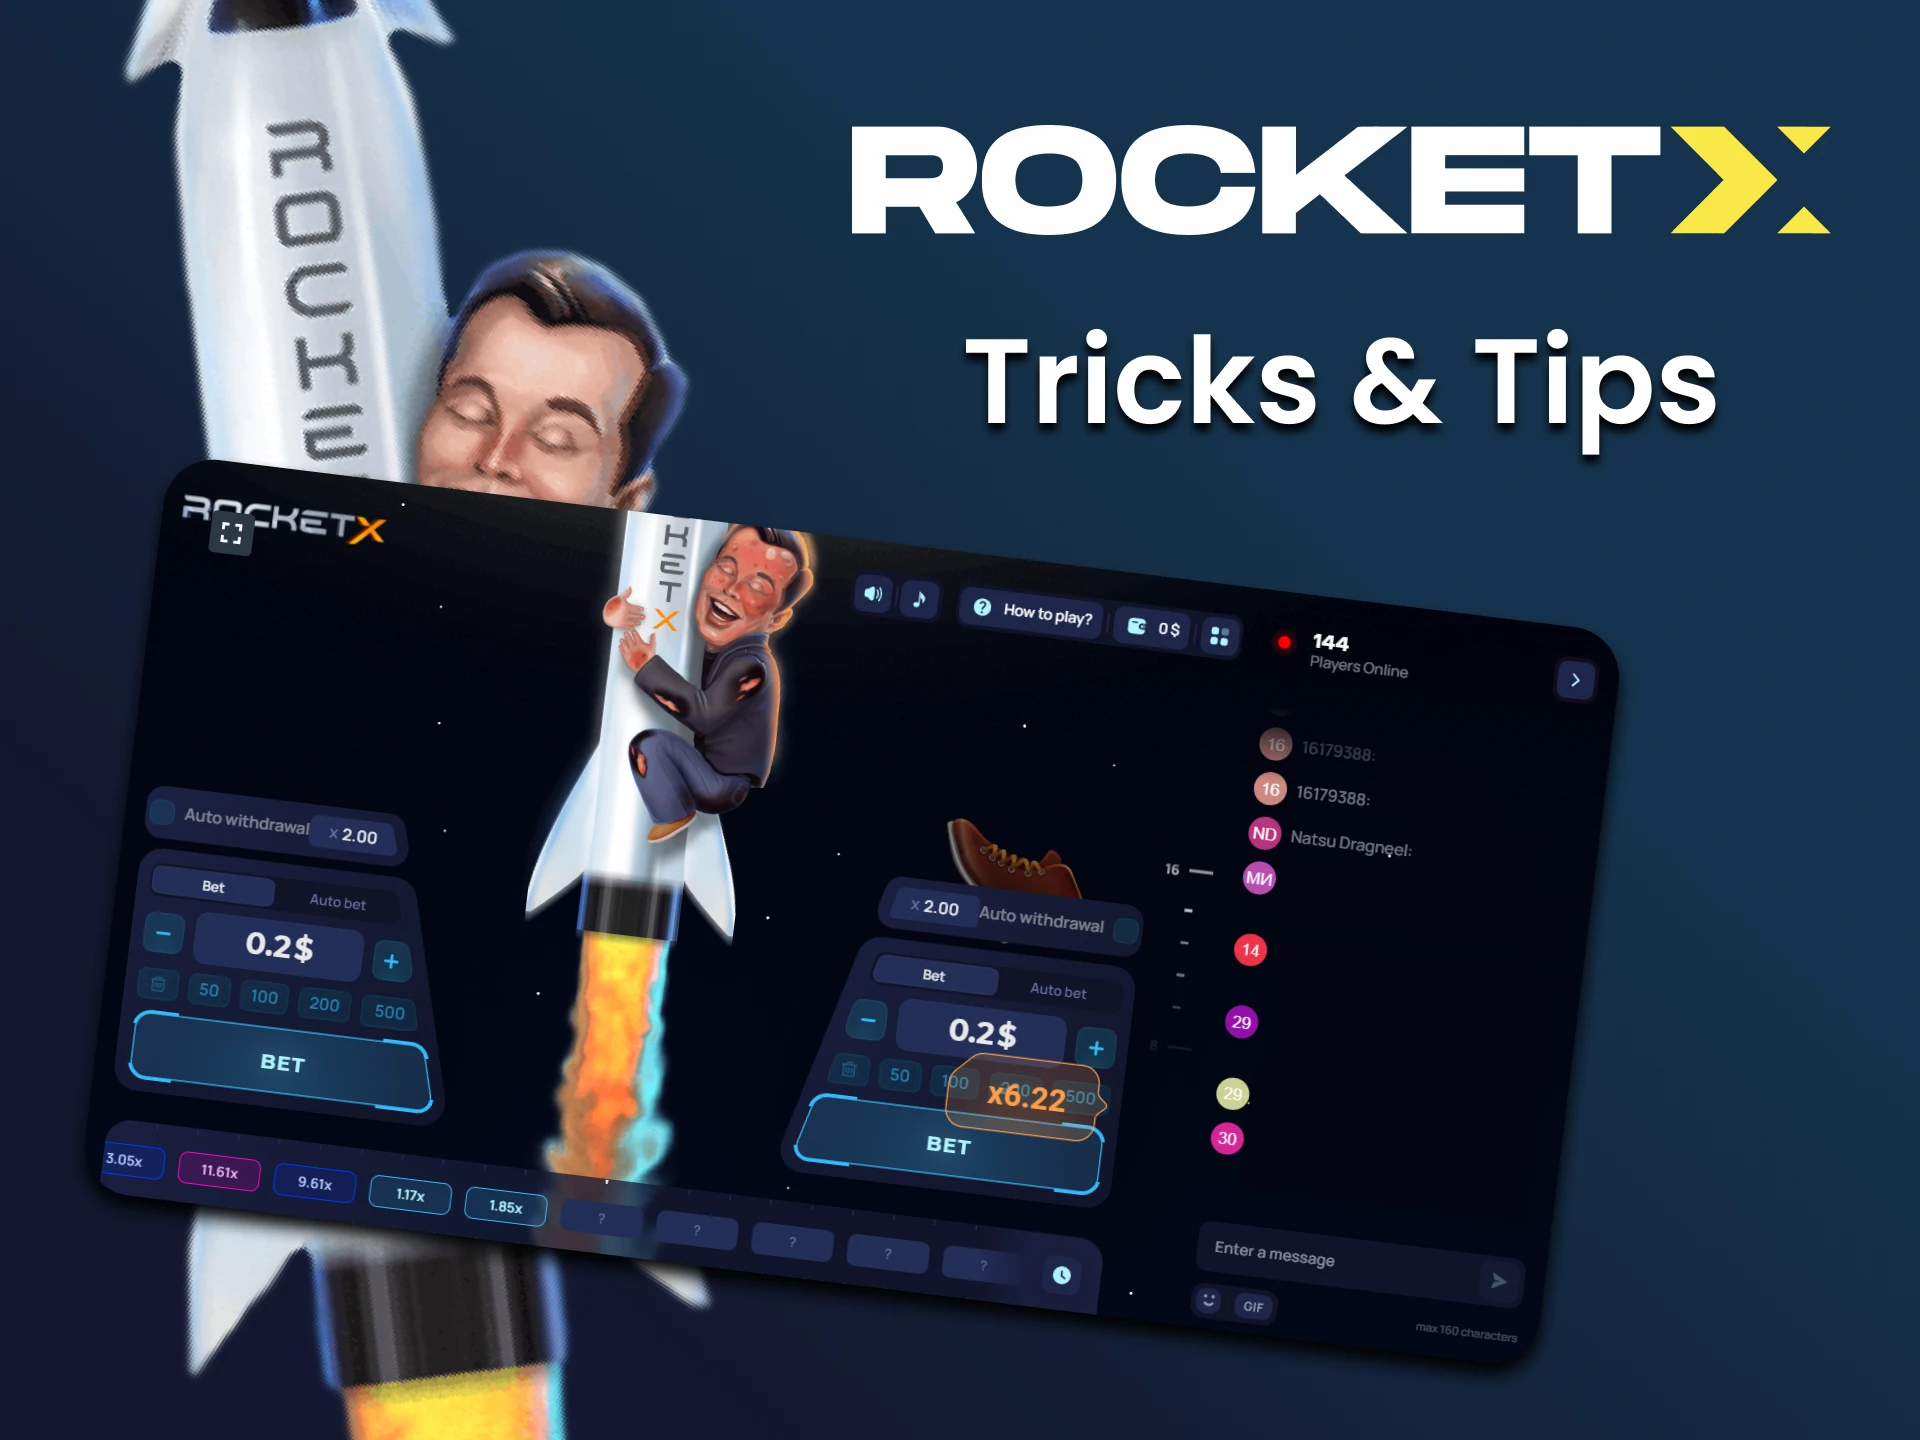 Find out what other Rocket X players are suggesting.